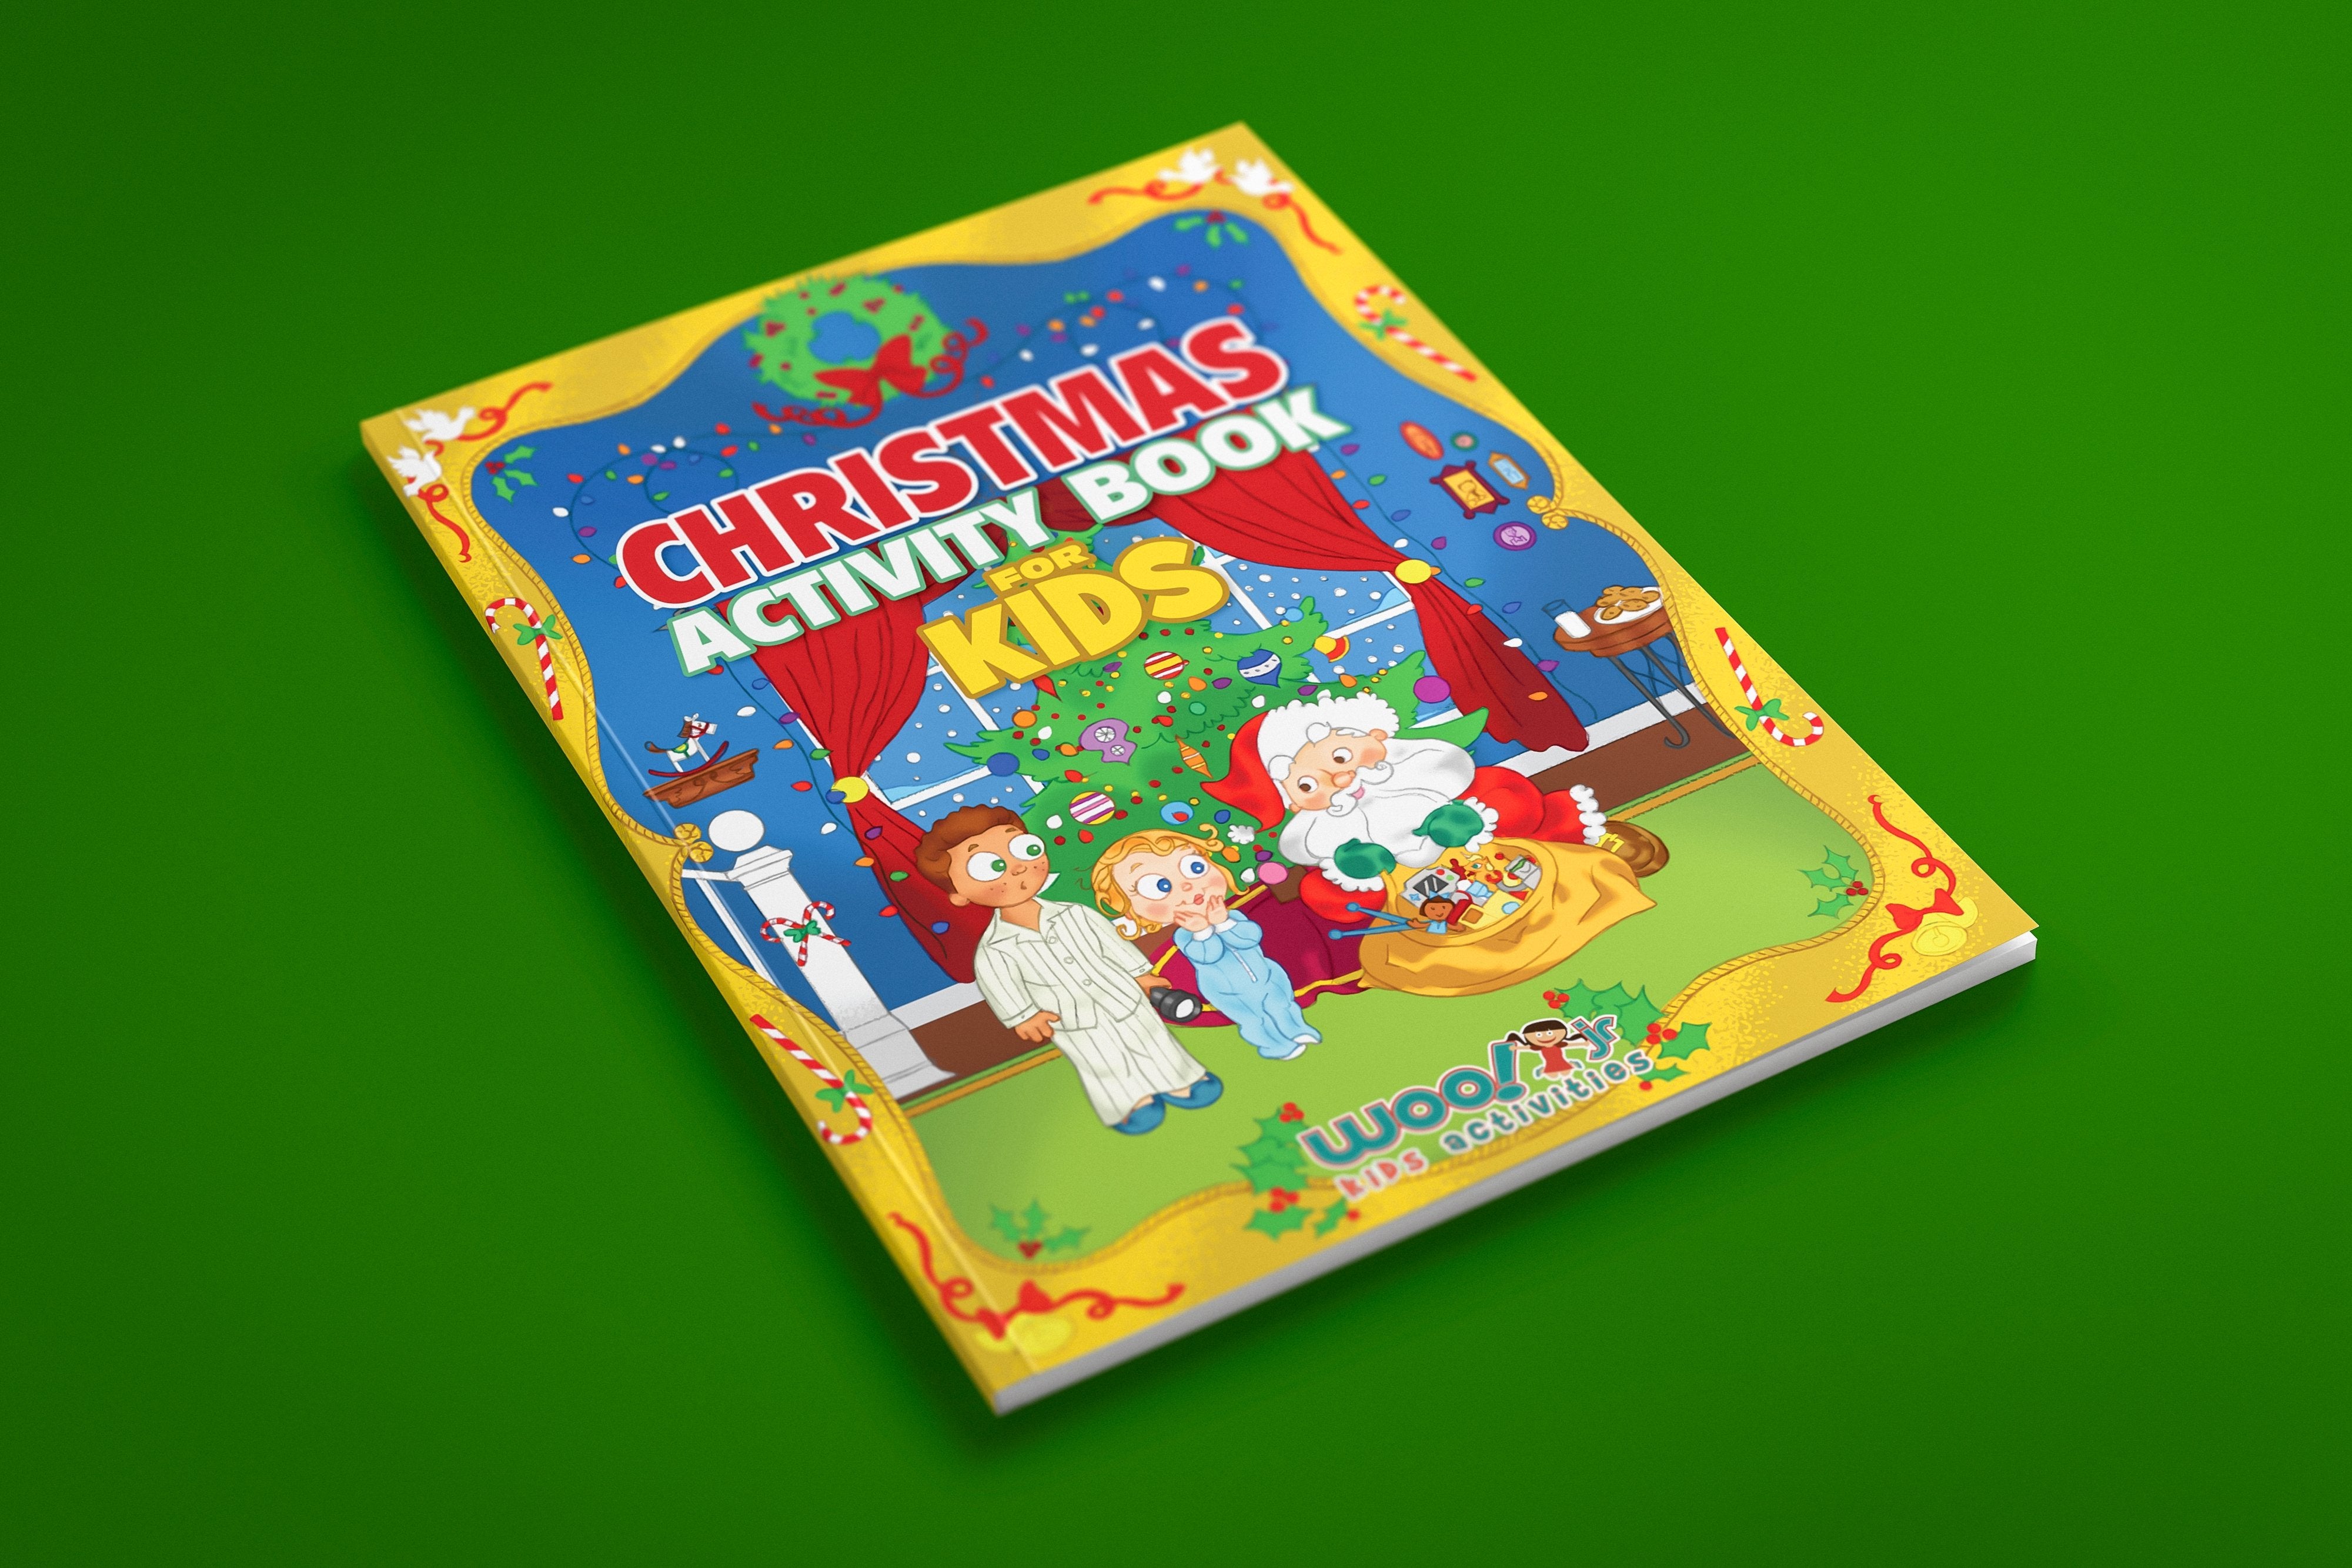 Christmas Kids Activity Pack